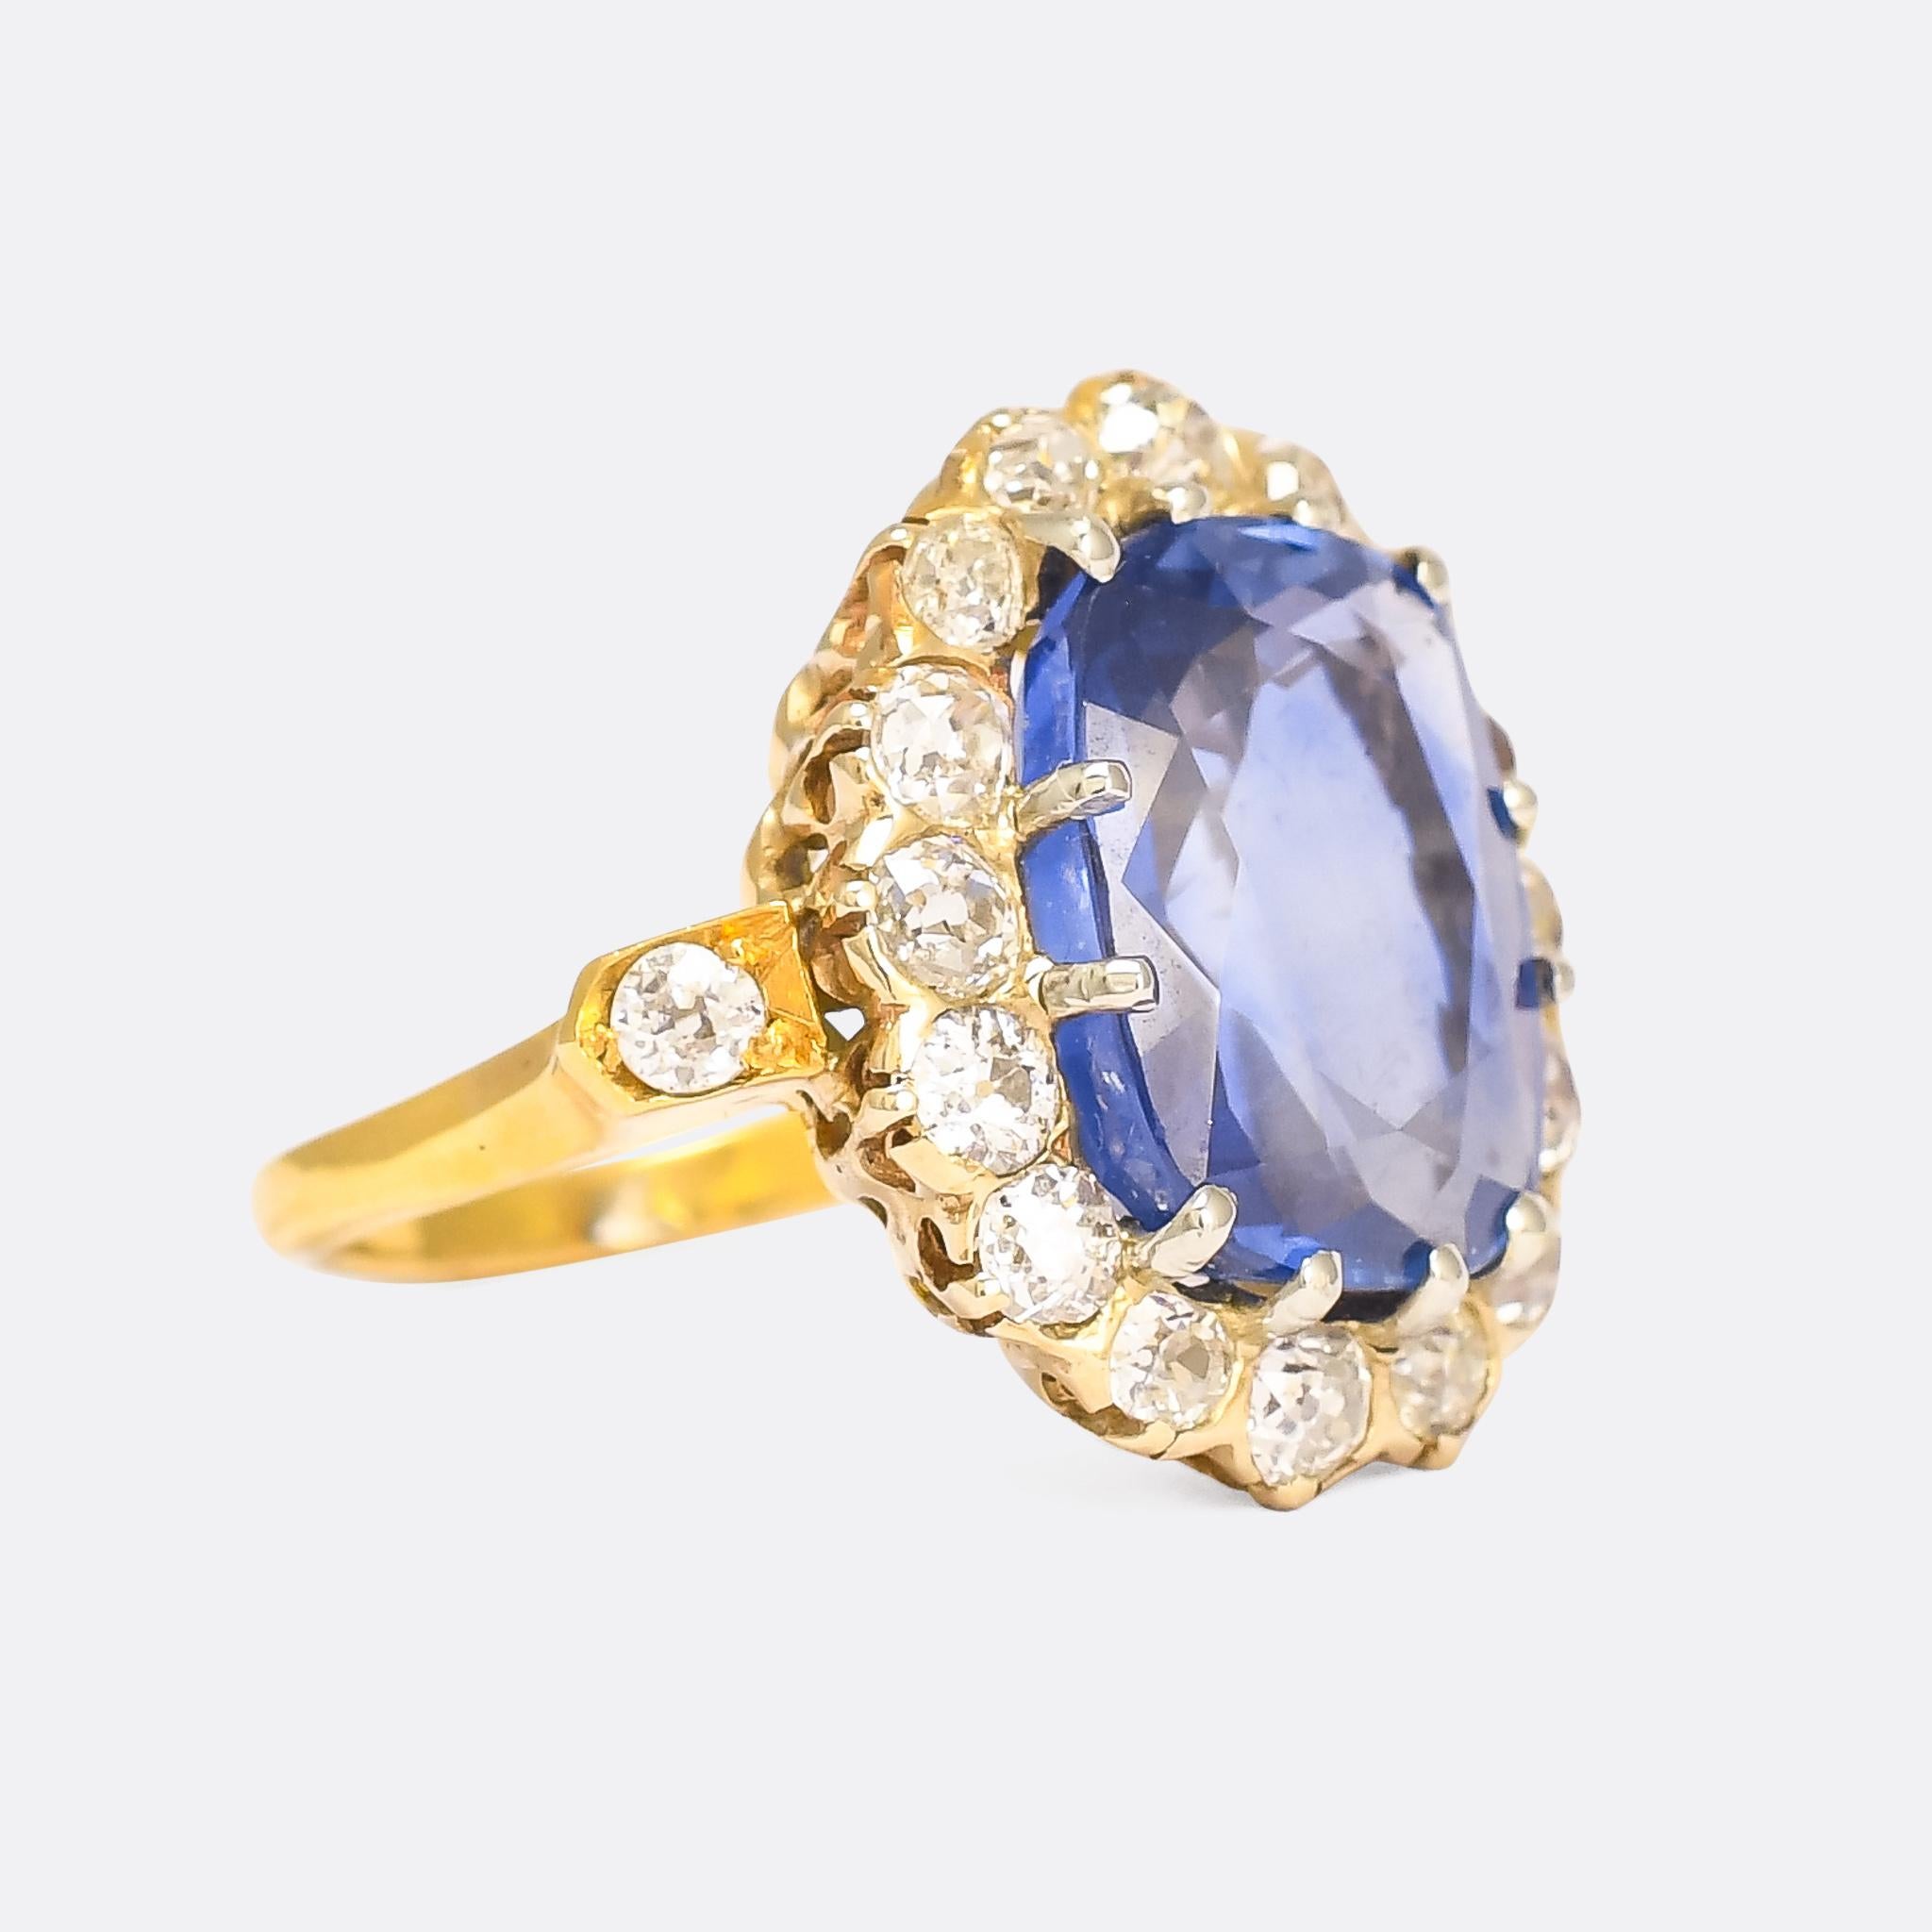 DESCRIPTION

Late Victorian, c.1900

Hello 13.5ct Burma no heat sapphire... An outstanding antique cluster ring dating from the early 20th Century, and set with the most incredible cornflower blue sapphire we've ever had the privilege of owning.